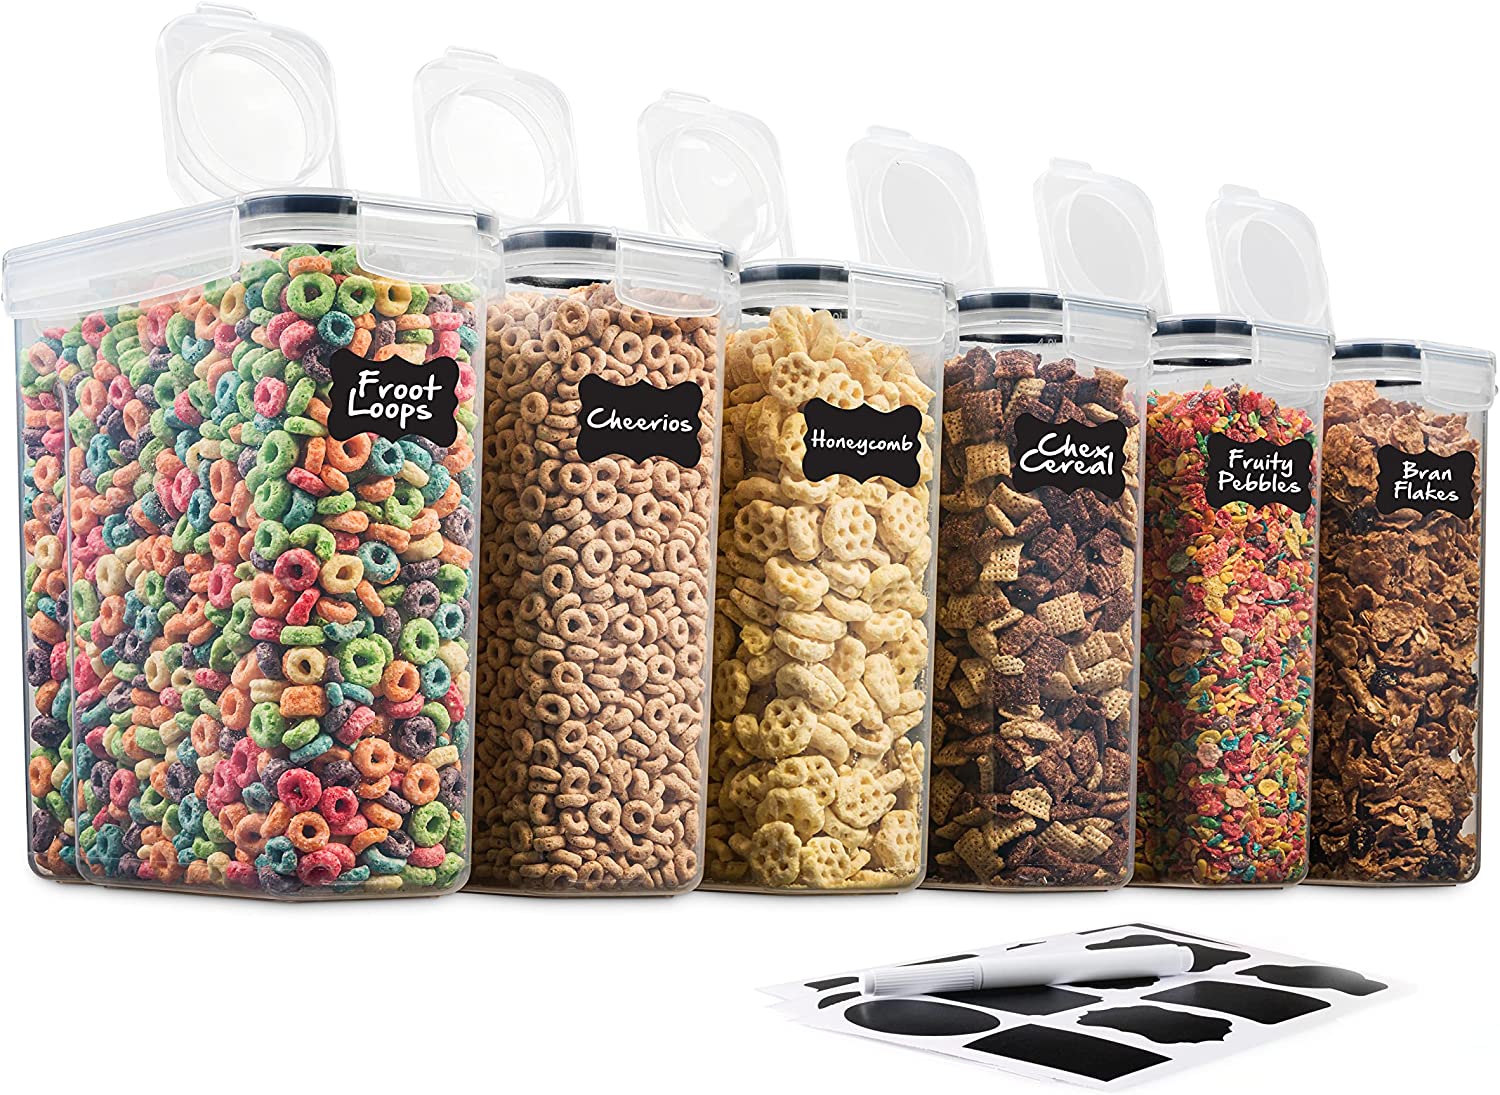 Cereal Container Set, MCIRCO Airtight Food Storage Containers ((4L  /135.2oz) Set of 6, BPA Free Cereal Dispensers with Measuring Tools